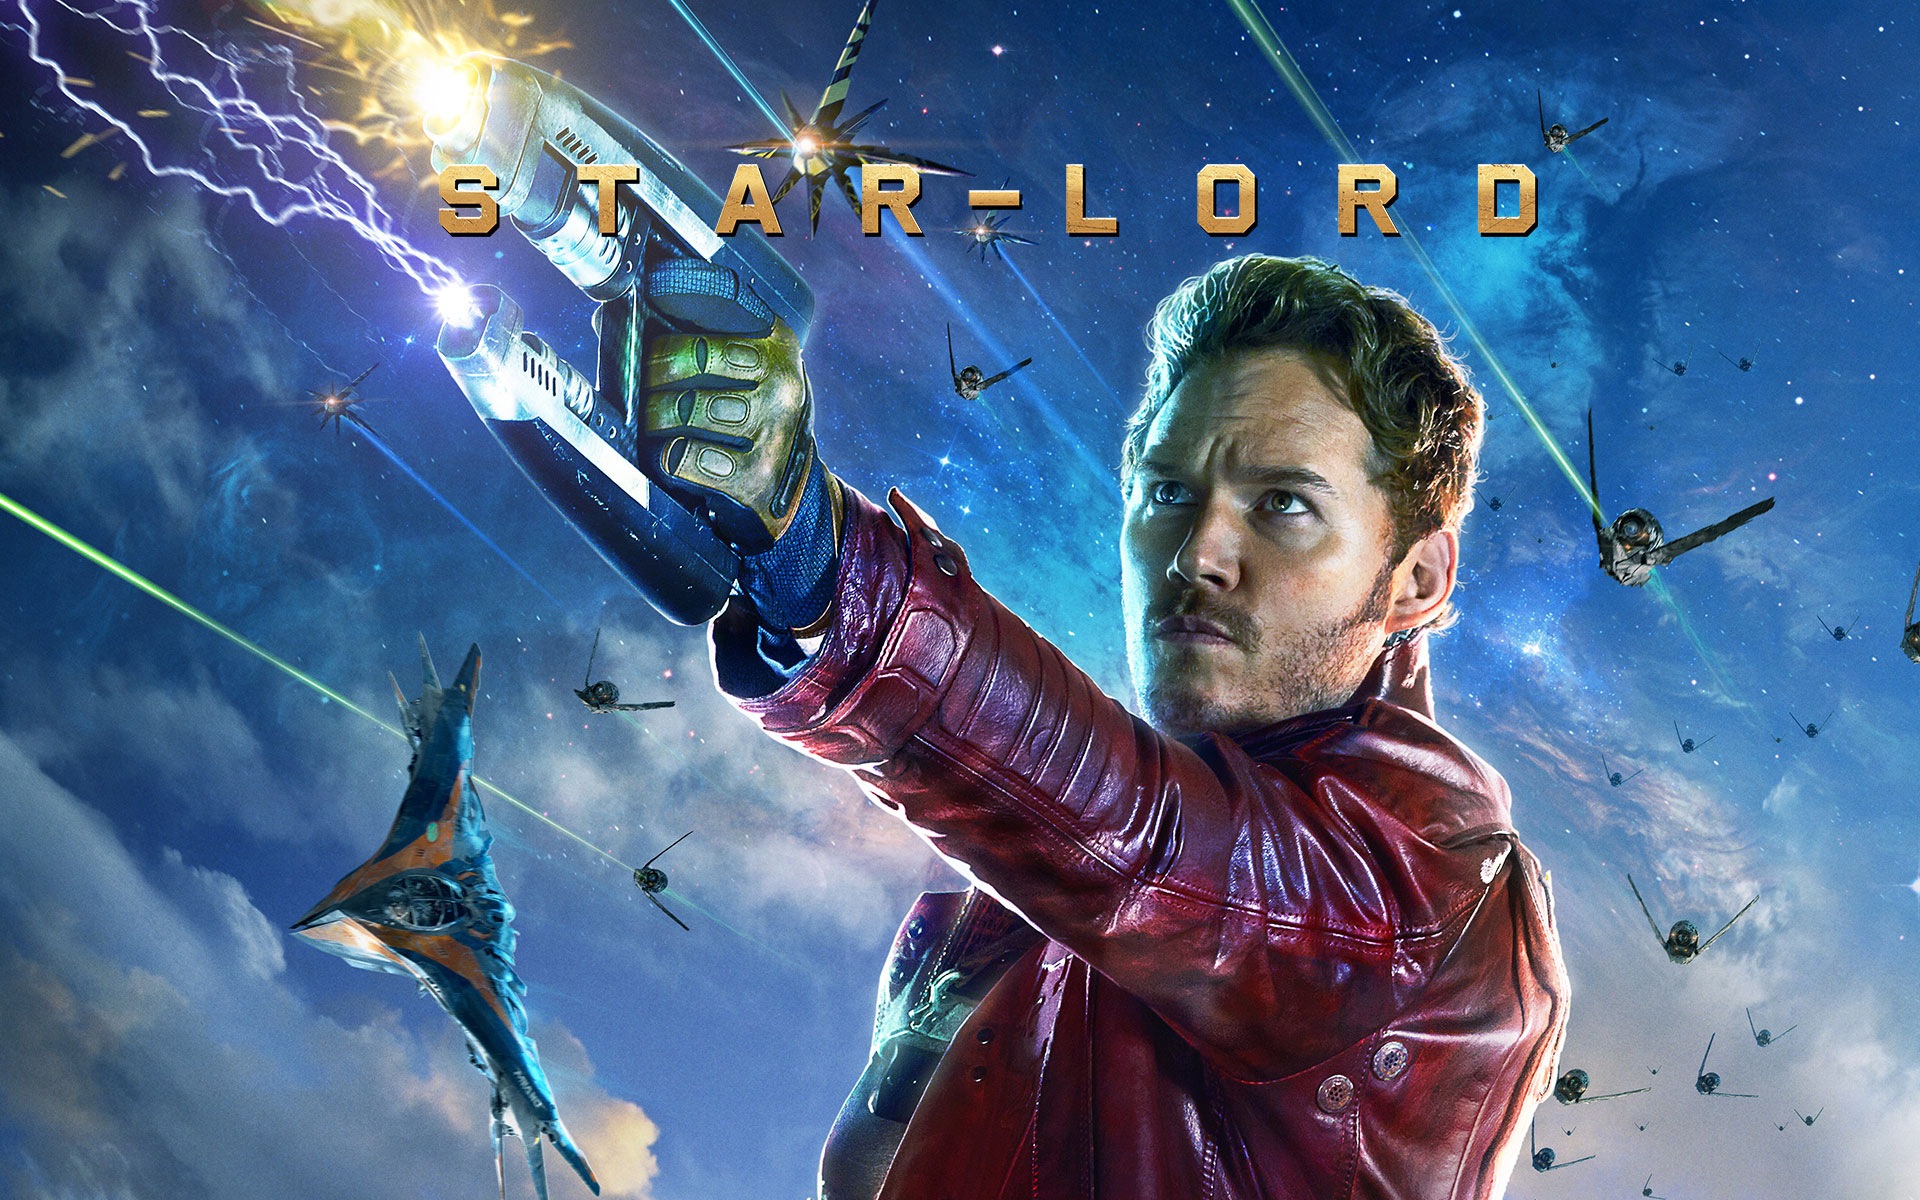 Guardians of the Galaxy 2014 HD movie wallpapers #13 - 1920x1200